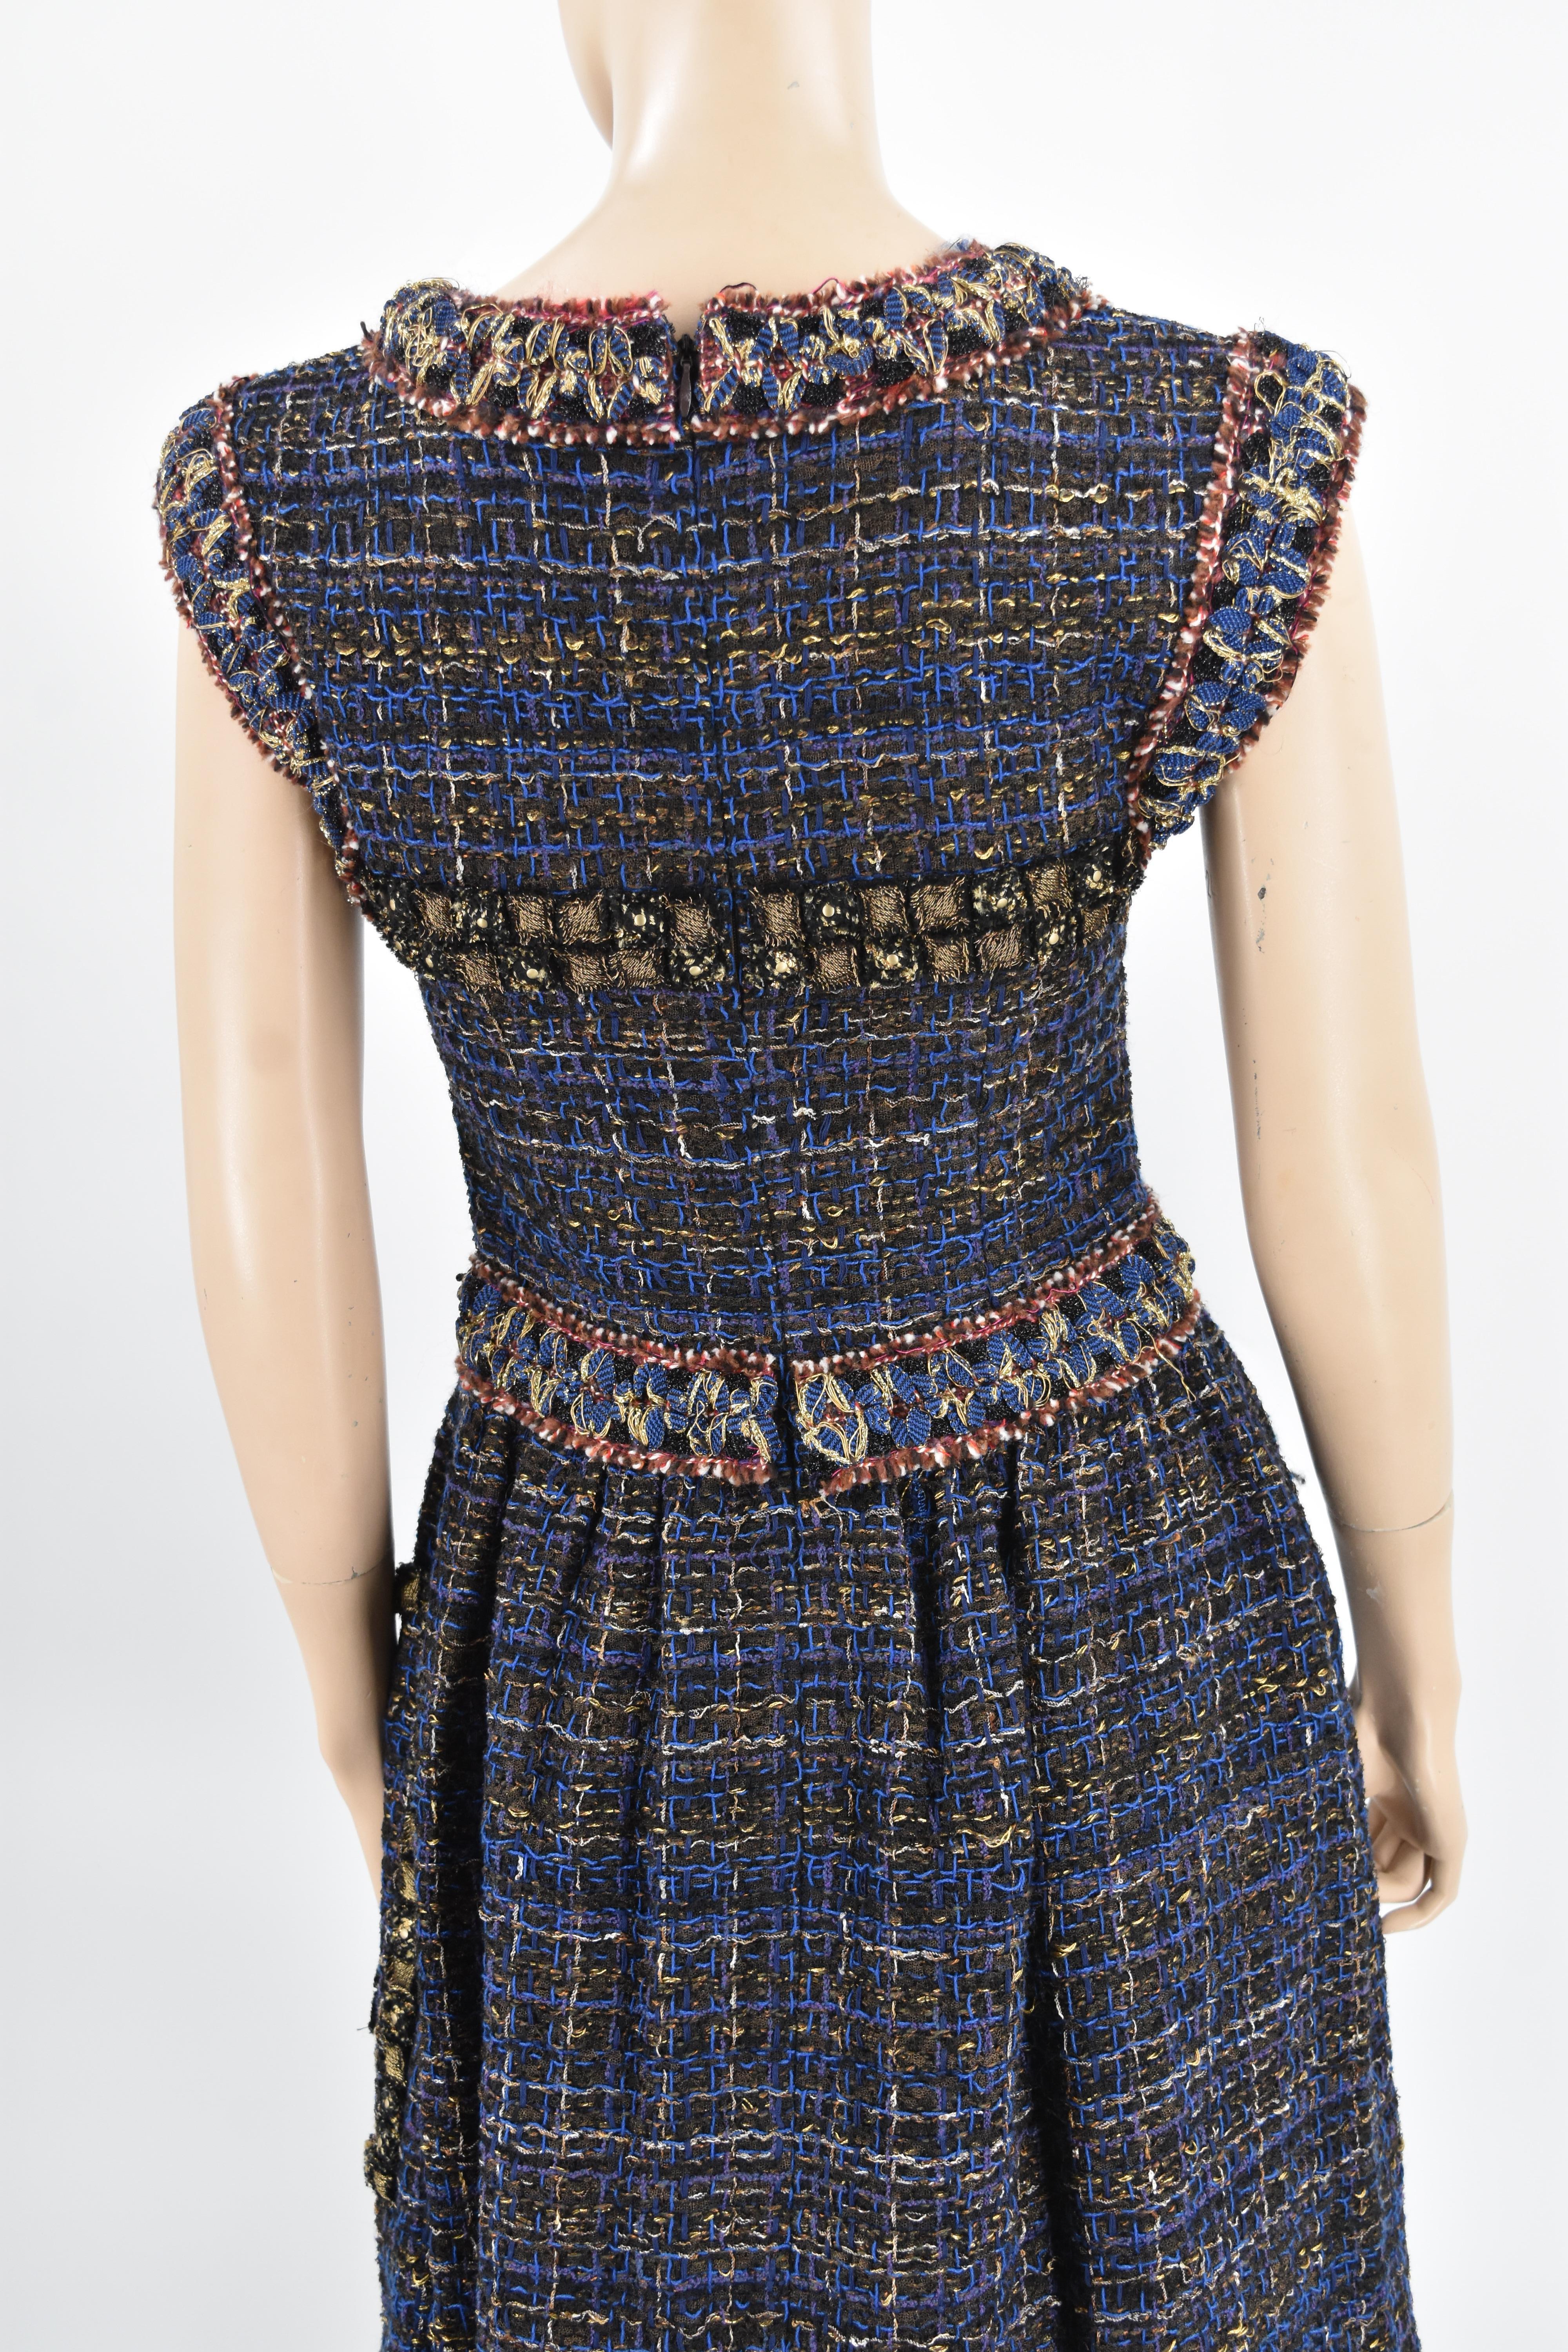 Chanel NWT 11A Fall 2011 Tweed Dress with CC logo 36 Rare New In New Condition For Sale In Merced, CA